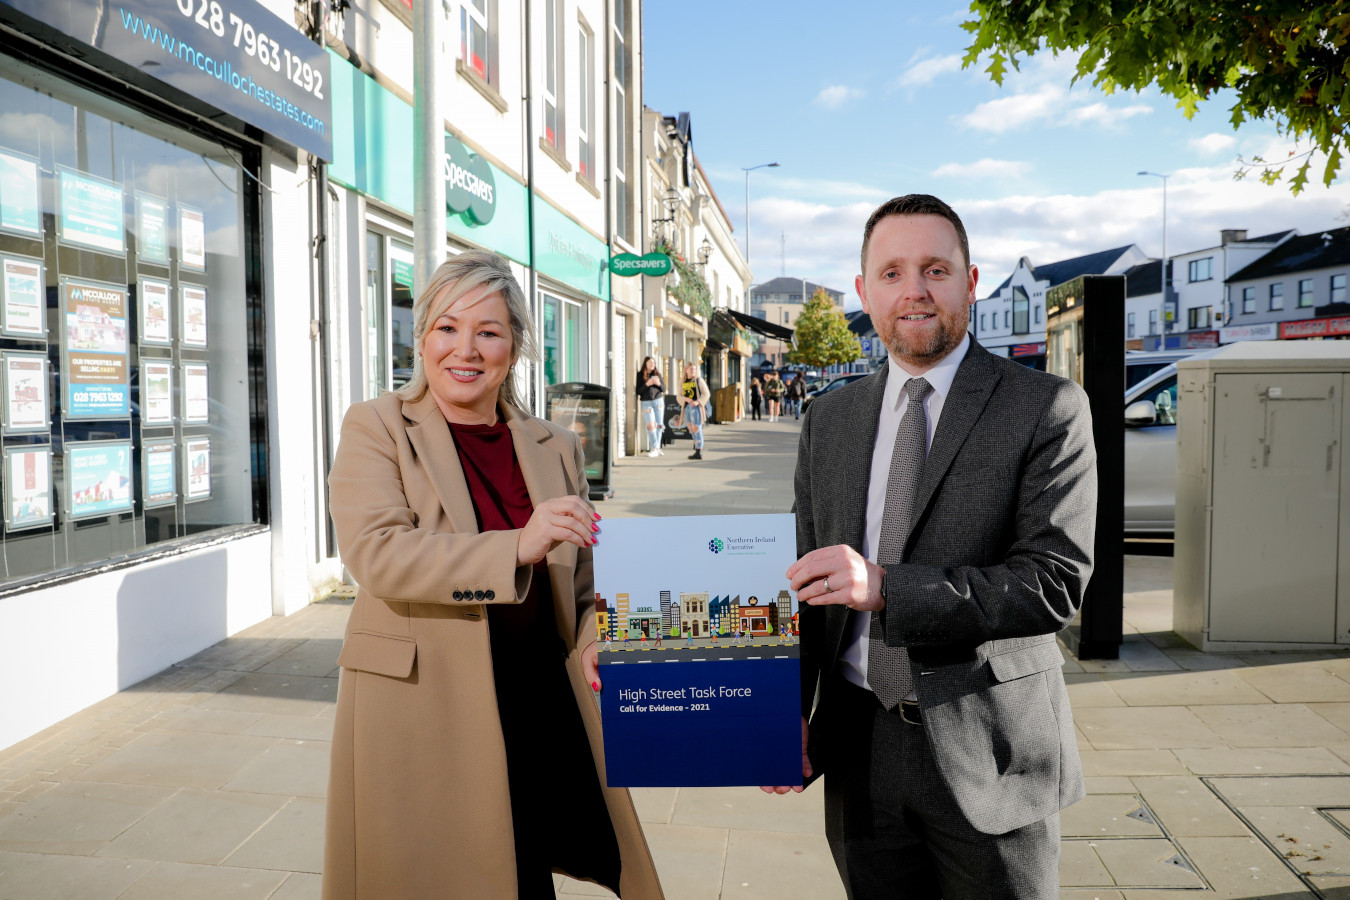 Ministers launch High Street Task Force call for evidence